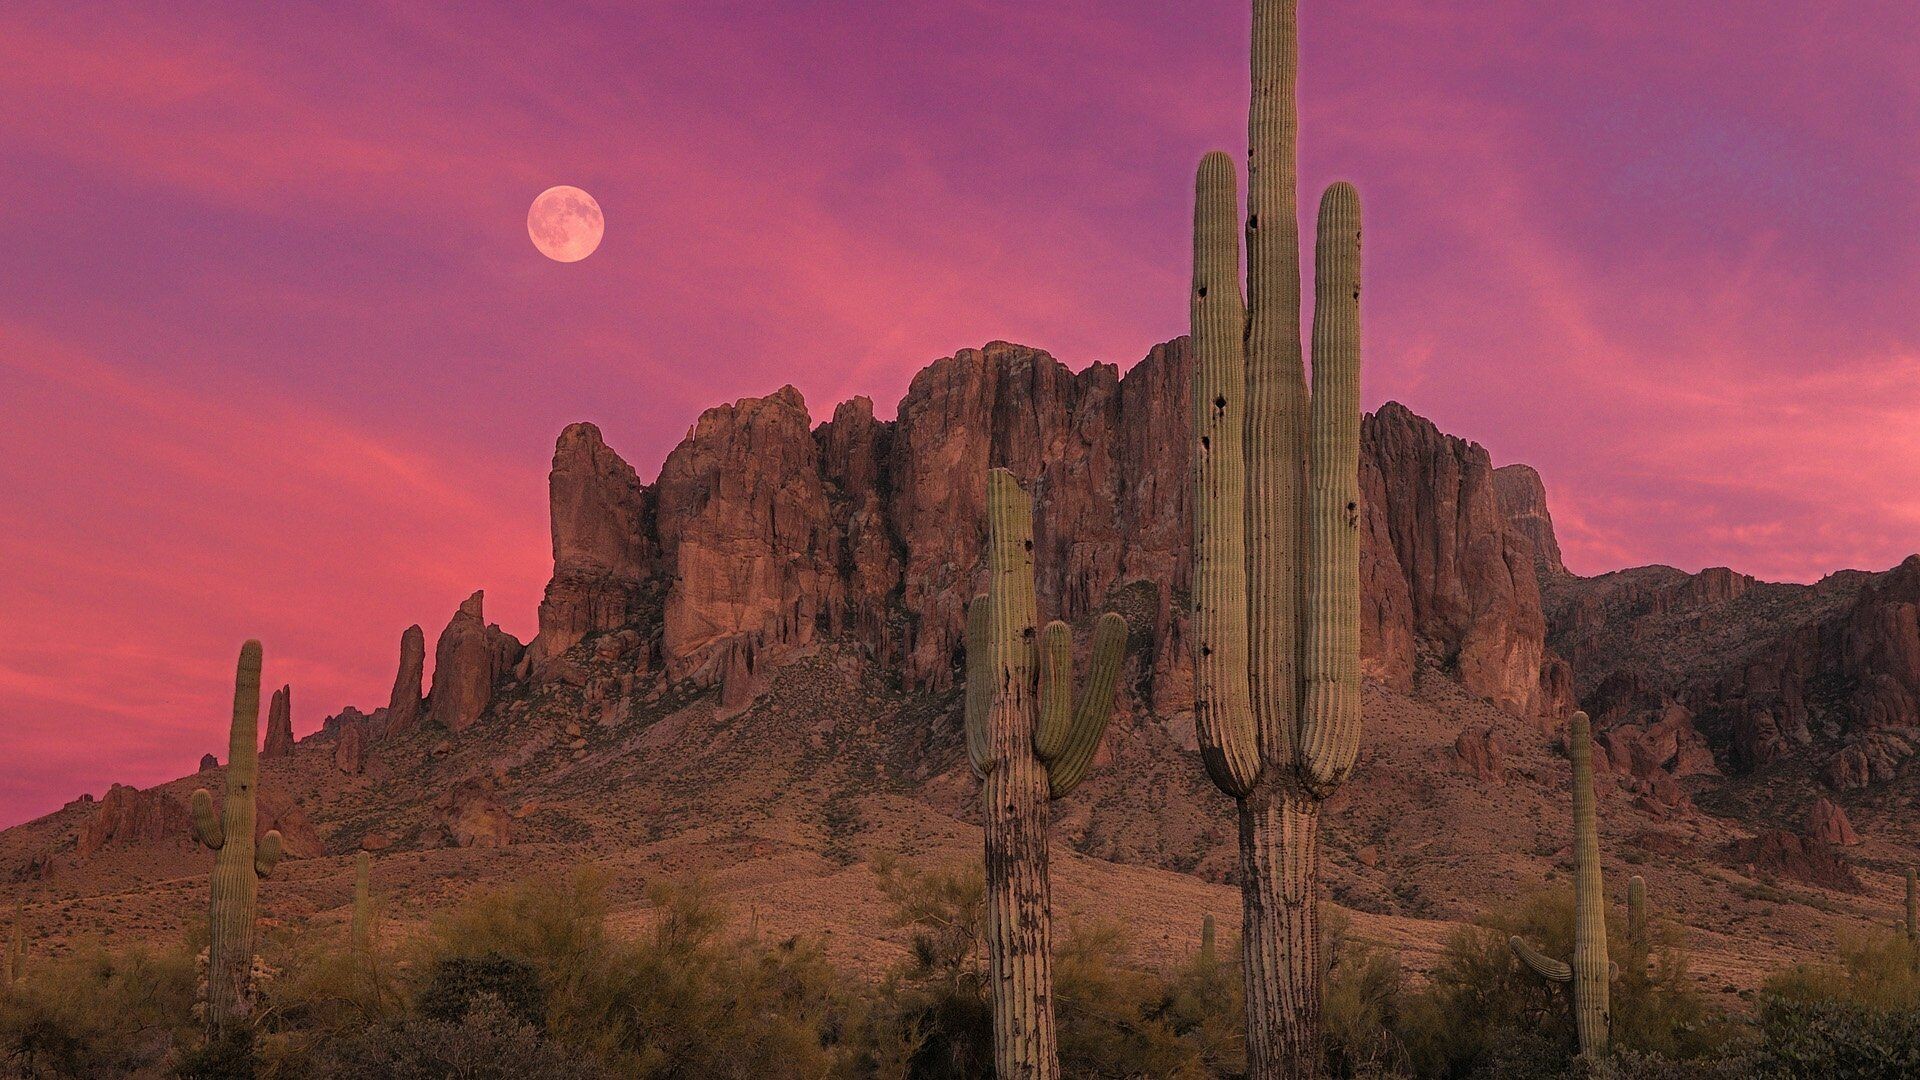 Arizona Desert Wallpaper: HD, 4K, 5K for PC and Mobile. Download free image for iPhone, Android